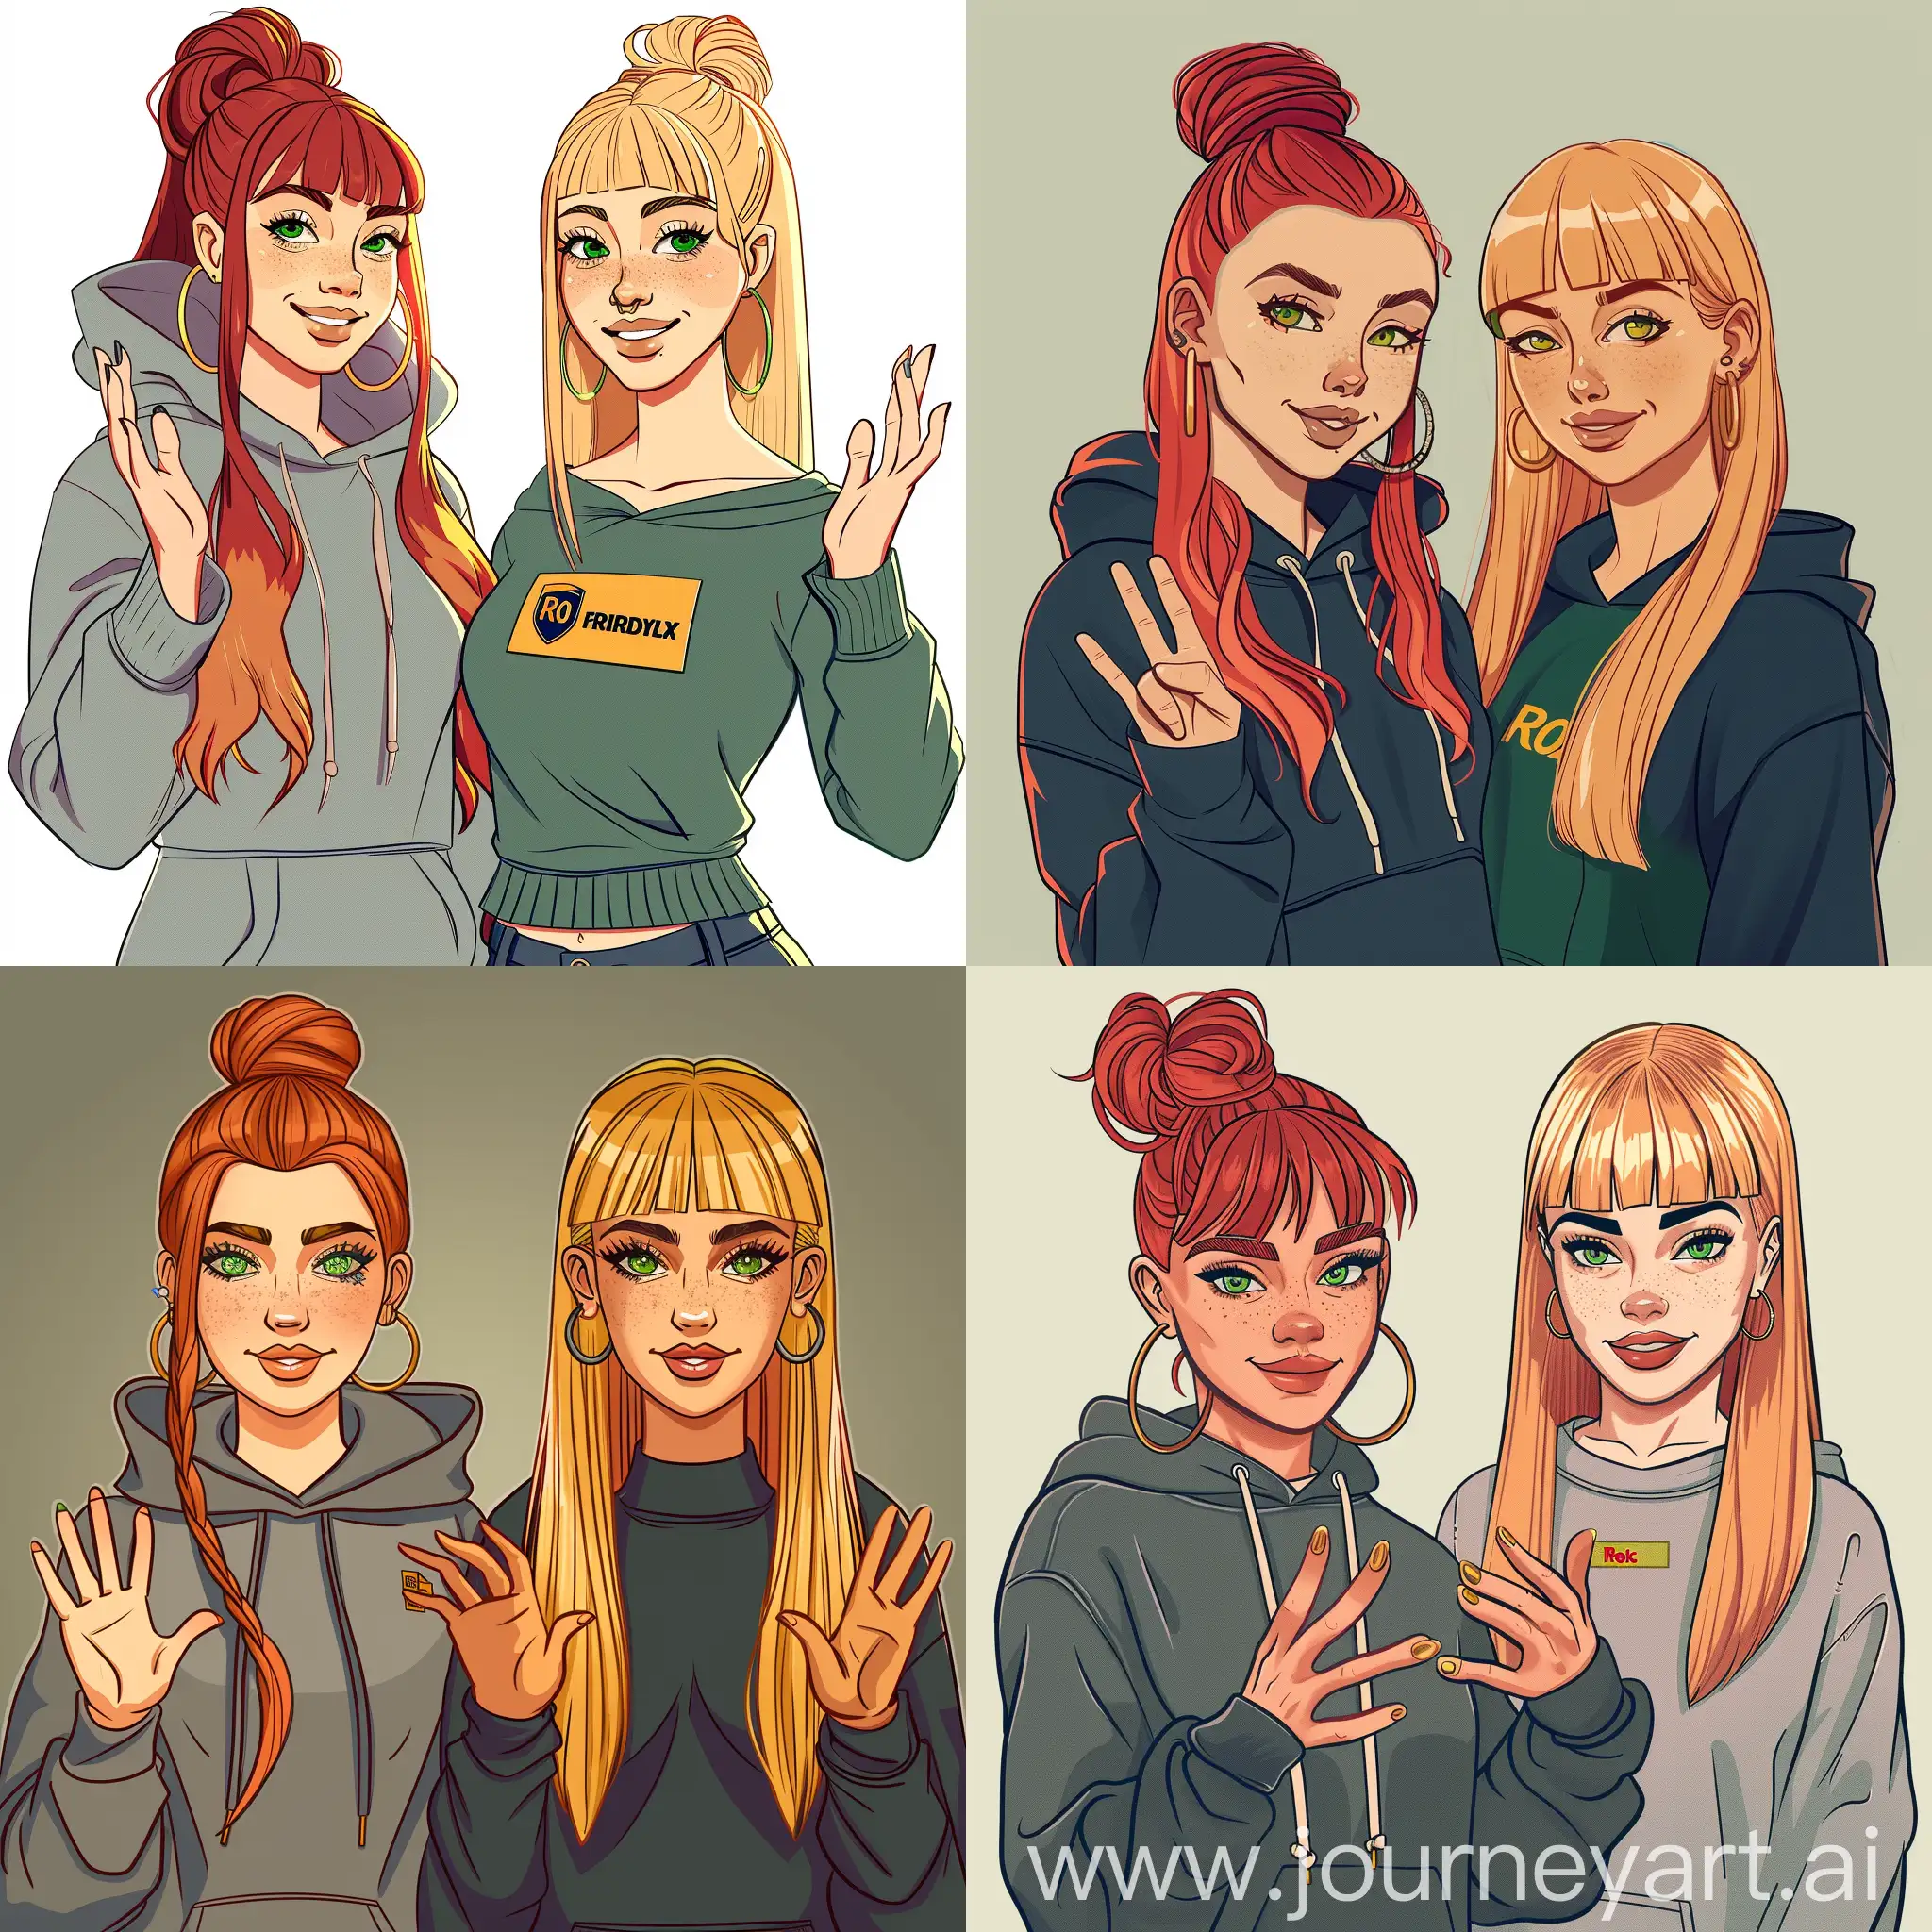 illustrate female twins, one has long red hair tied on top in a tight bun and green eyes and wears hoodies and hoop earrings.  the other has straight bleached shoulder length blonde hair and green eyes and works for Royal Mail. They both doing a smiling welcome gesture pose. create a comedy cartoon style. Ensure their full body is shown and not cropped